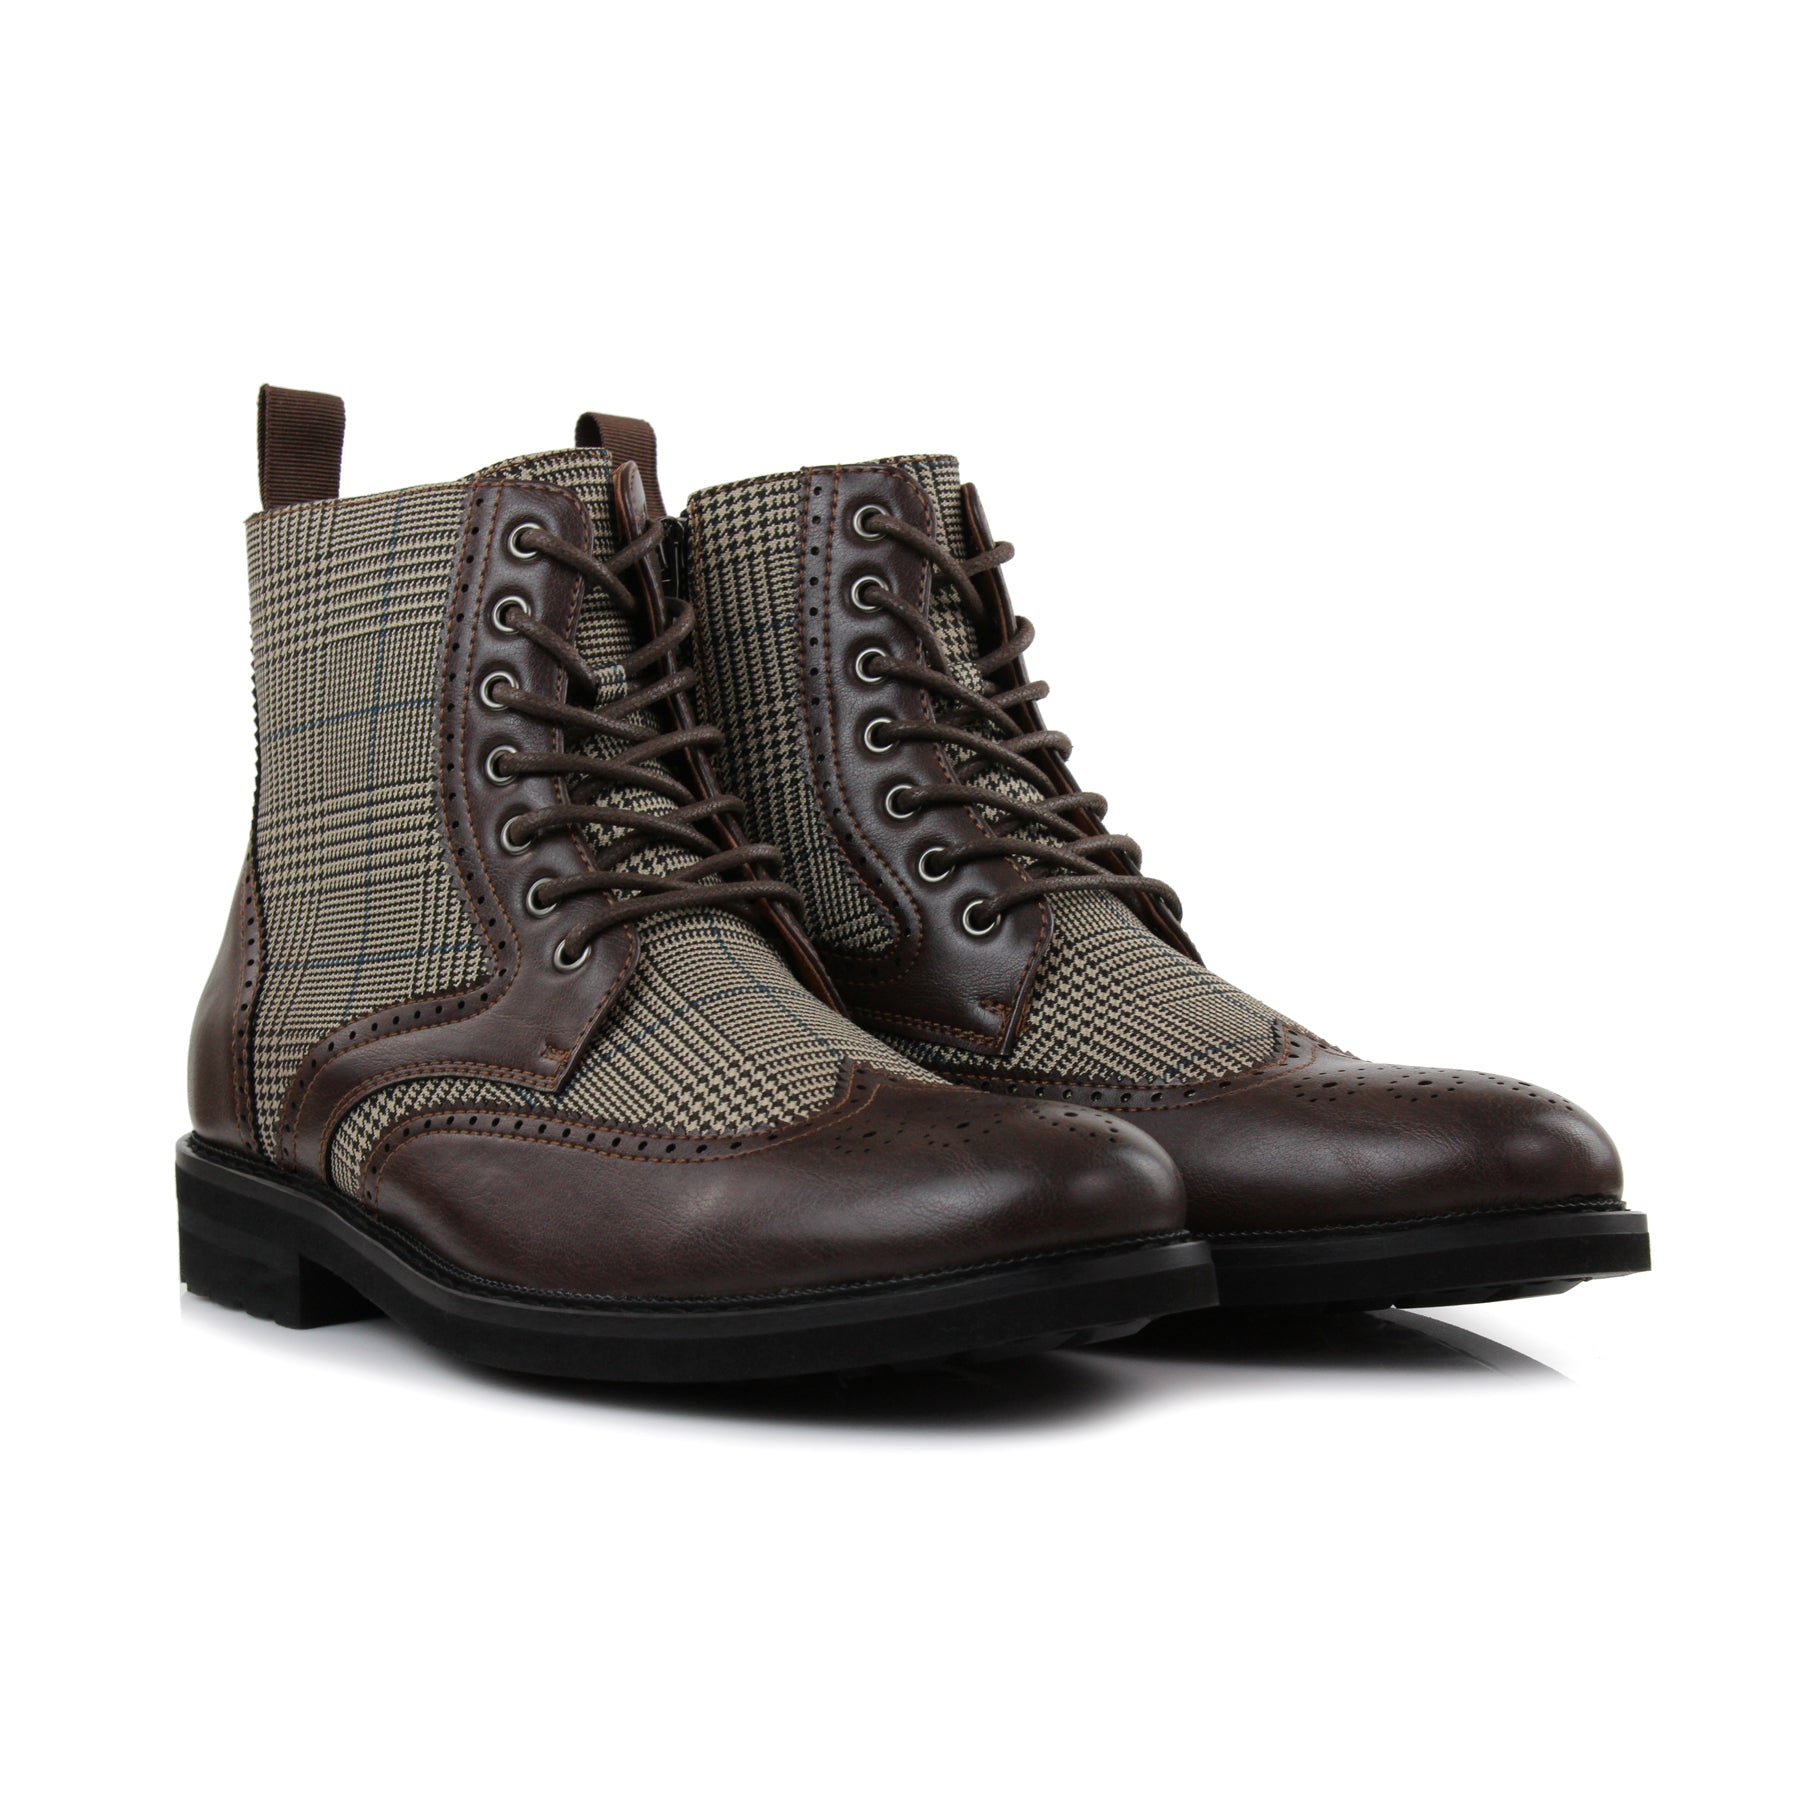 Plaid Brogue Wingtip Boots | Manchester by Polar Fox | Conal Footwear | Paired Angle View